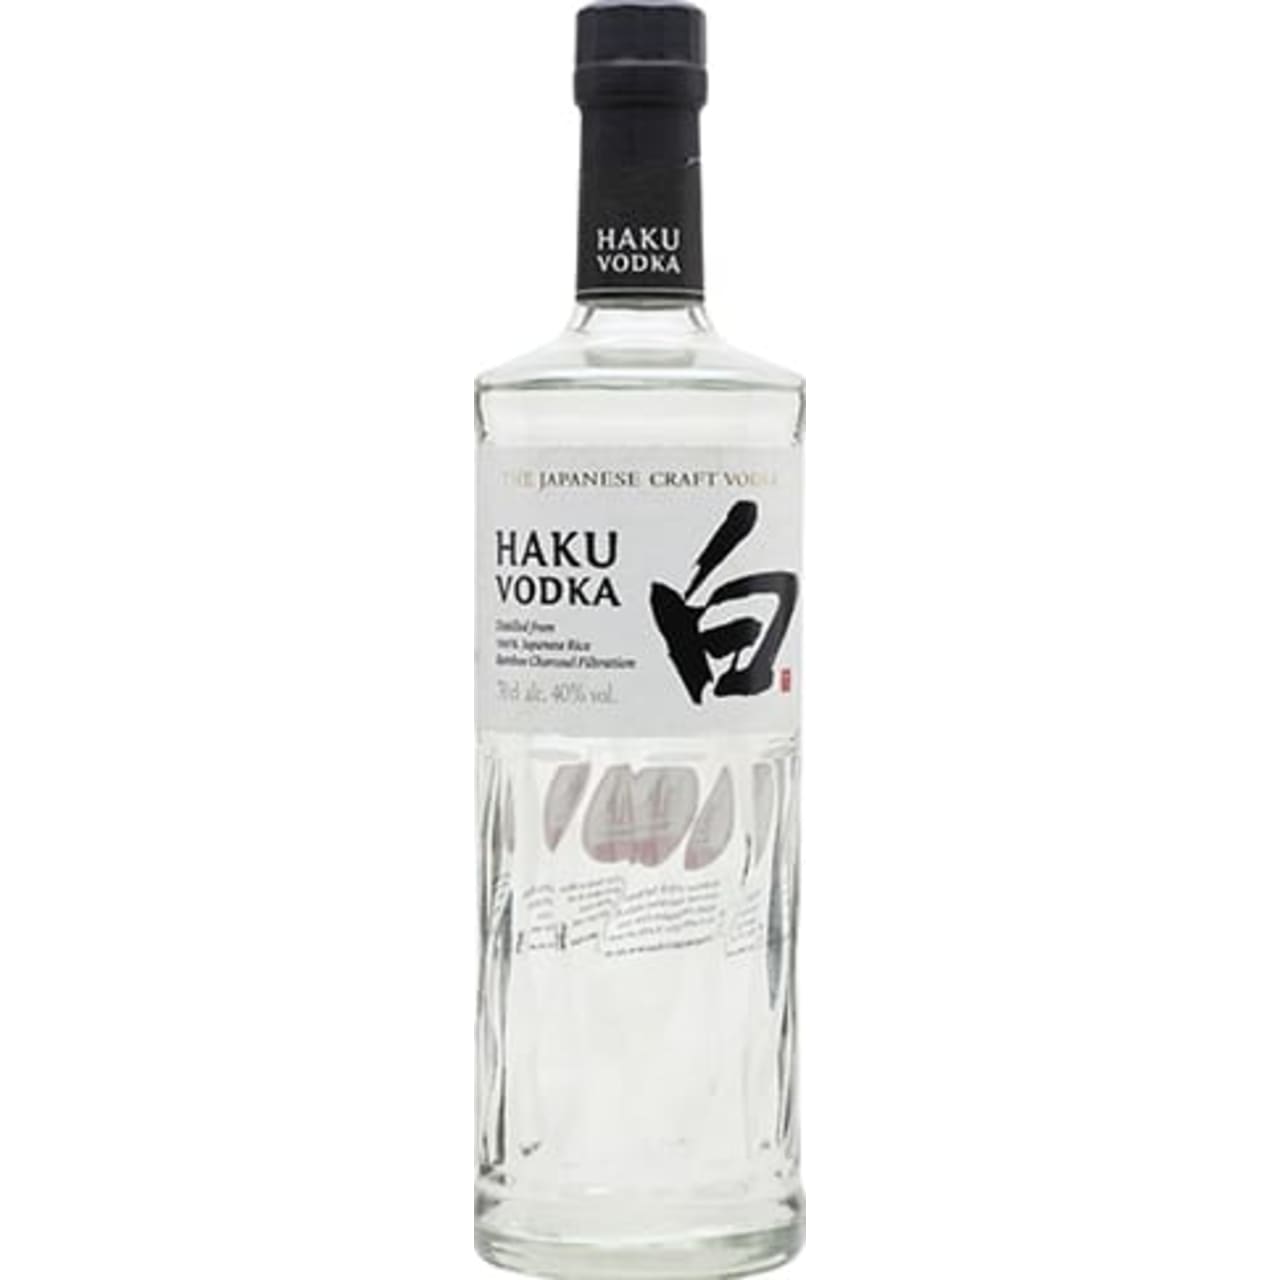 Haku is the premium Japanese craft vodka from the House of Suntory. Made with 100% Japanese white rice, the name Haku means “white” in Japanese. The word can also be read as “brilliant” – a tribute to the craft of mastering a clear, clean, and luminous vodka. Filtered through bamboo charcoal, Haku has an unparalleled soft, round, and subtly sweet taste.